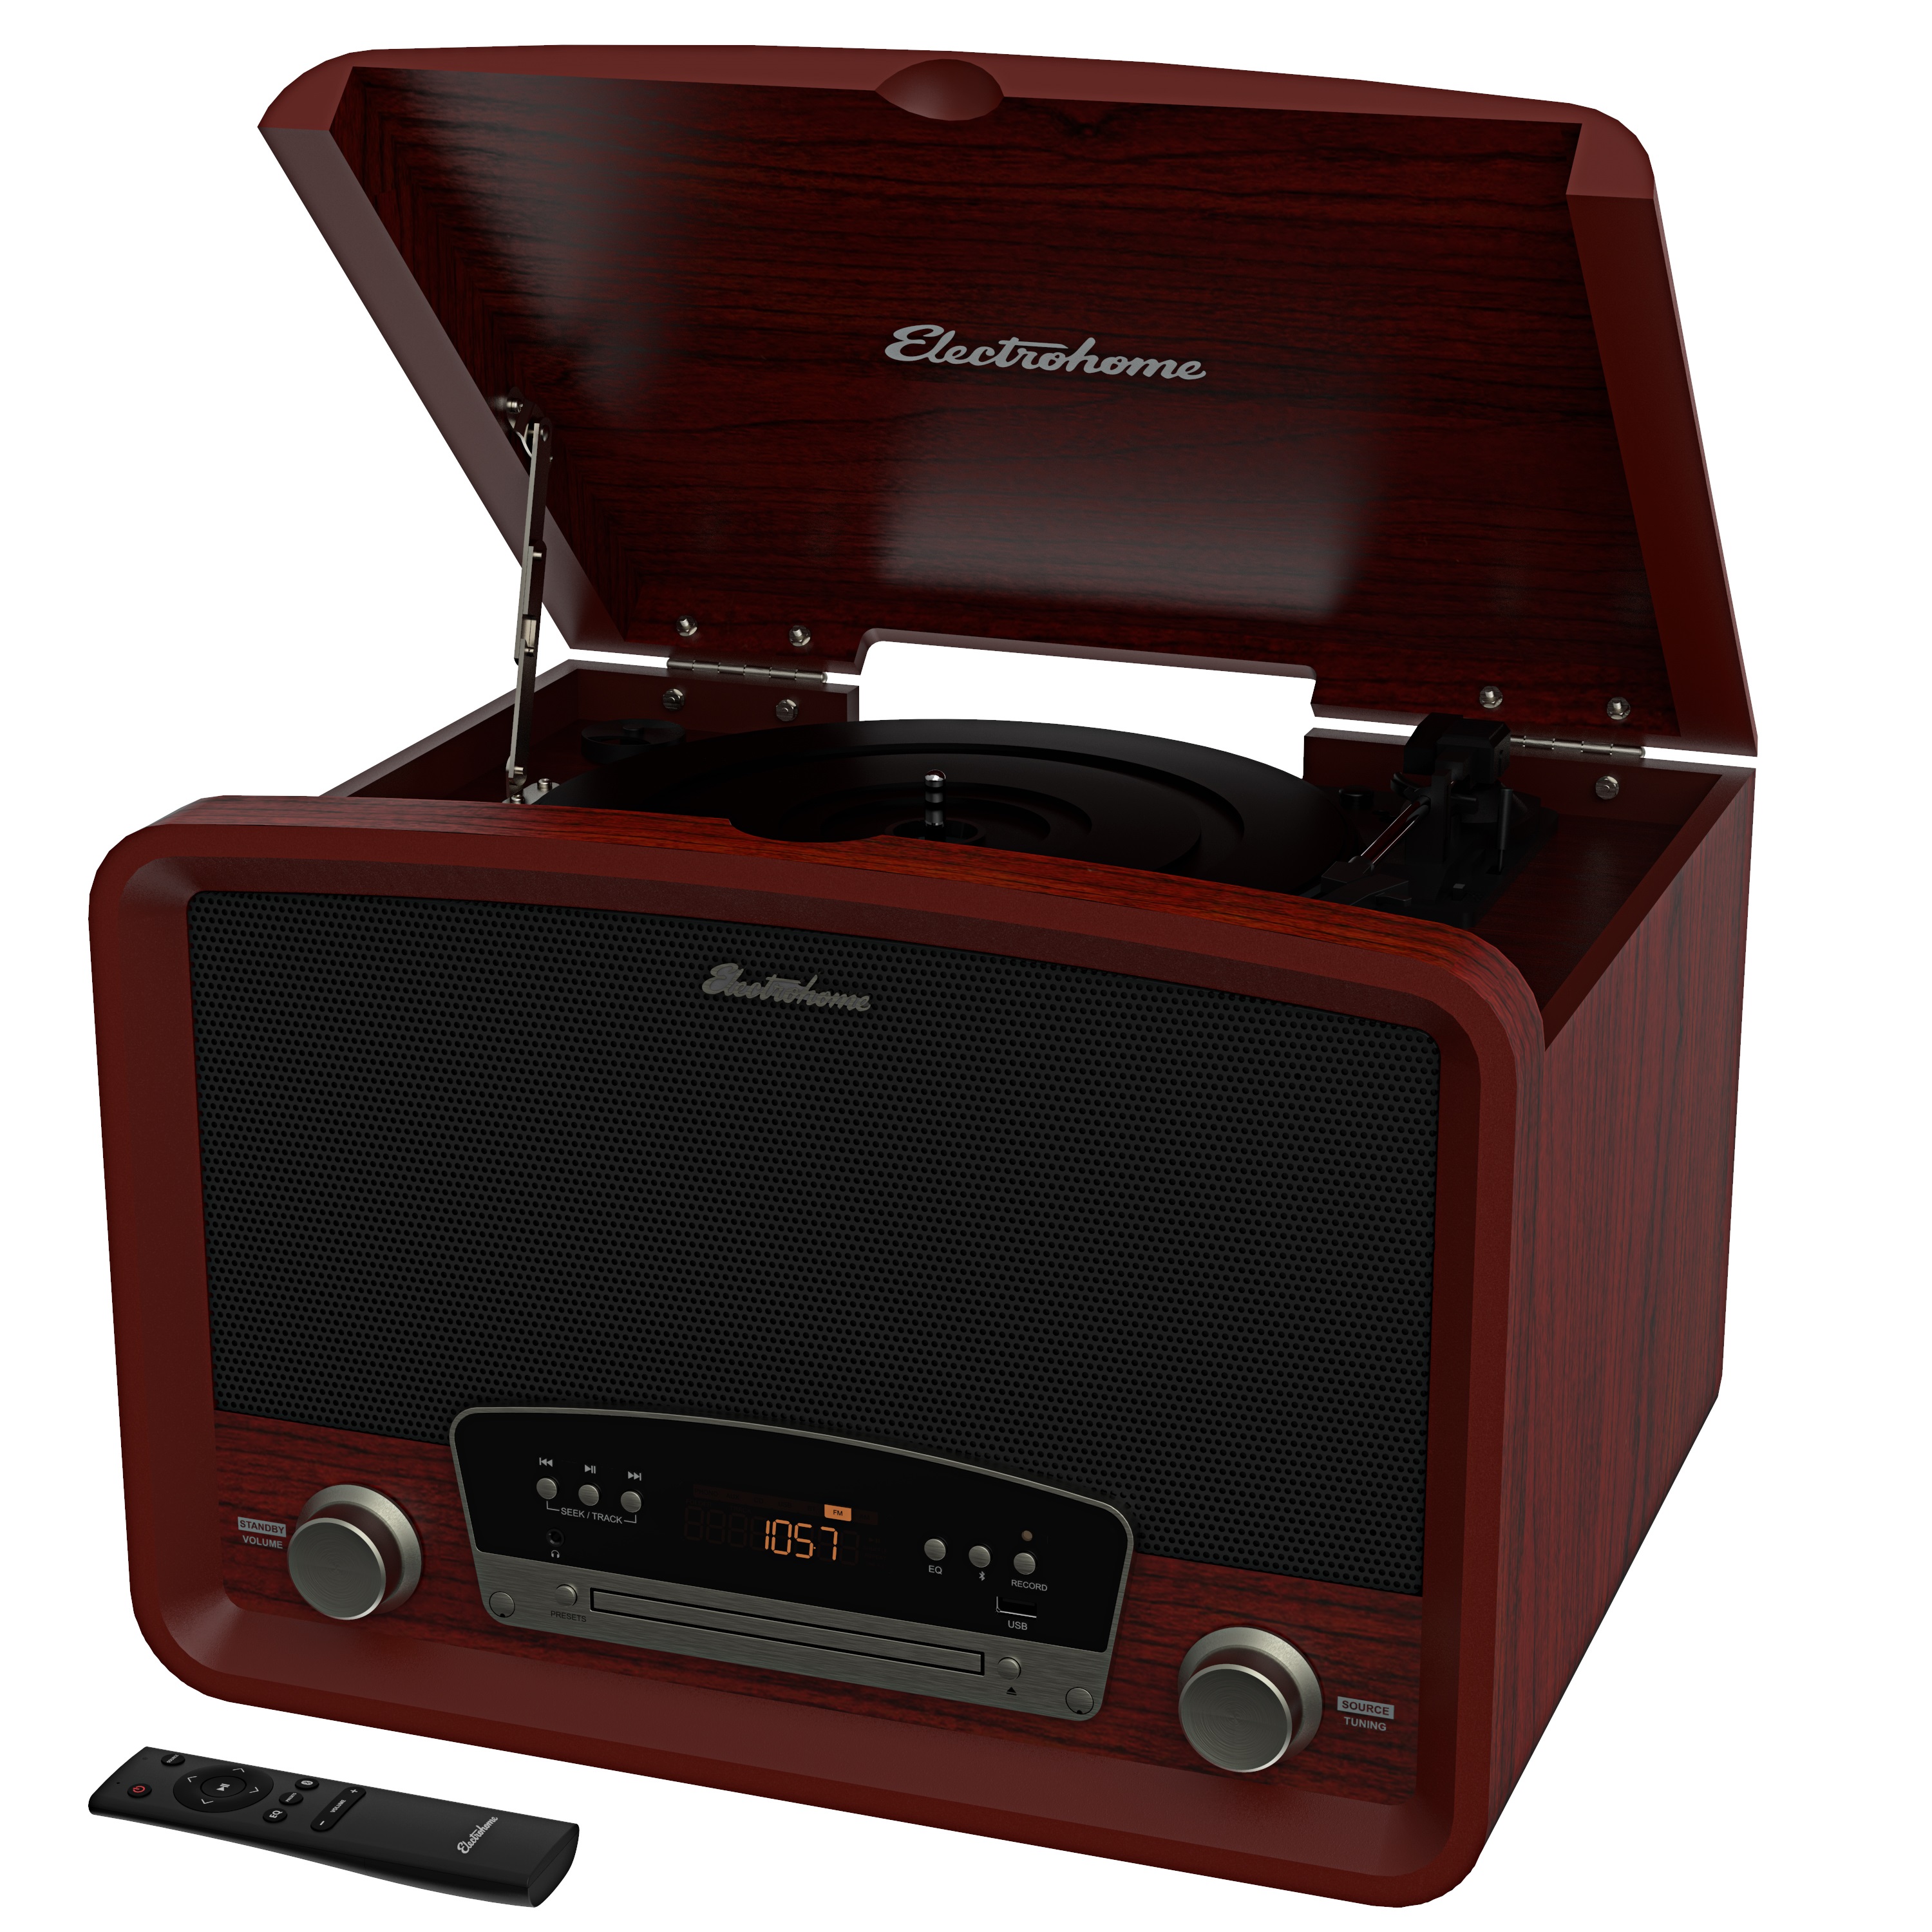 Electrohome Vinyl Record Player - 1 Year Extended Warranty - image 3 of 6